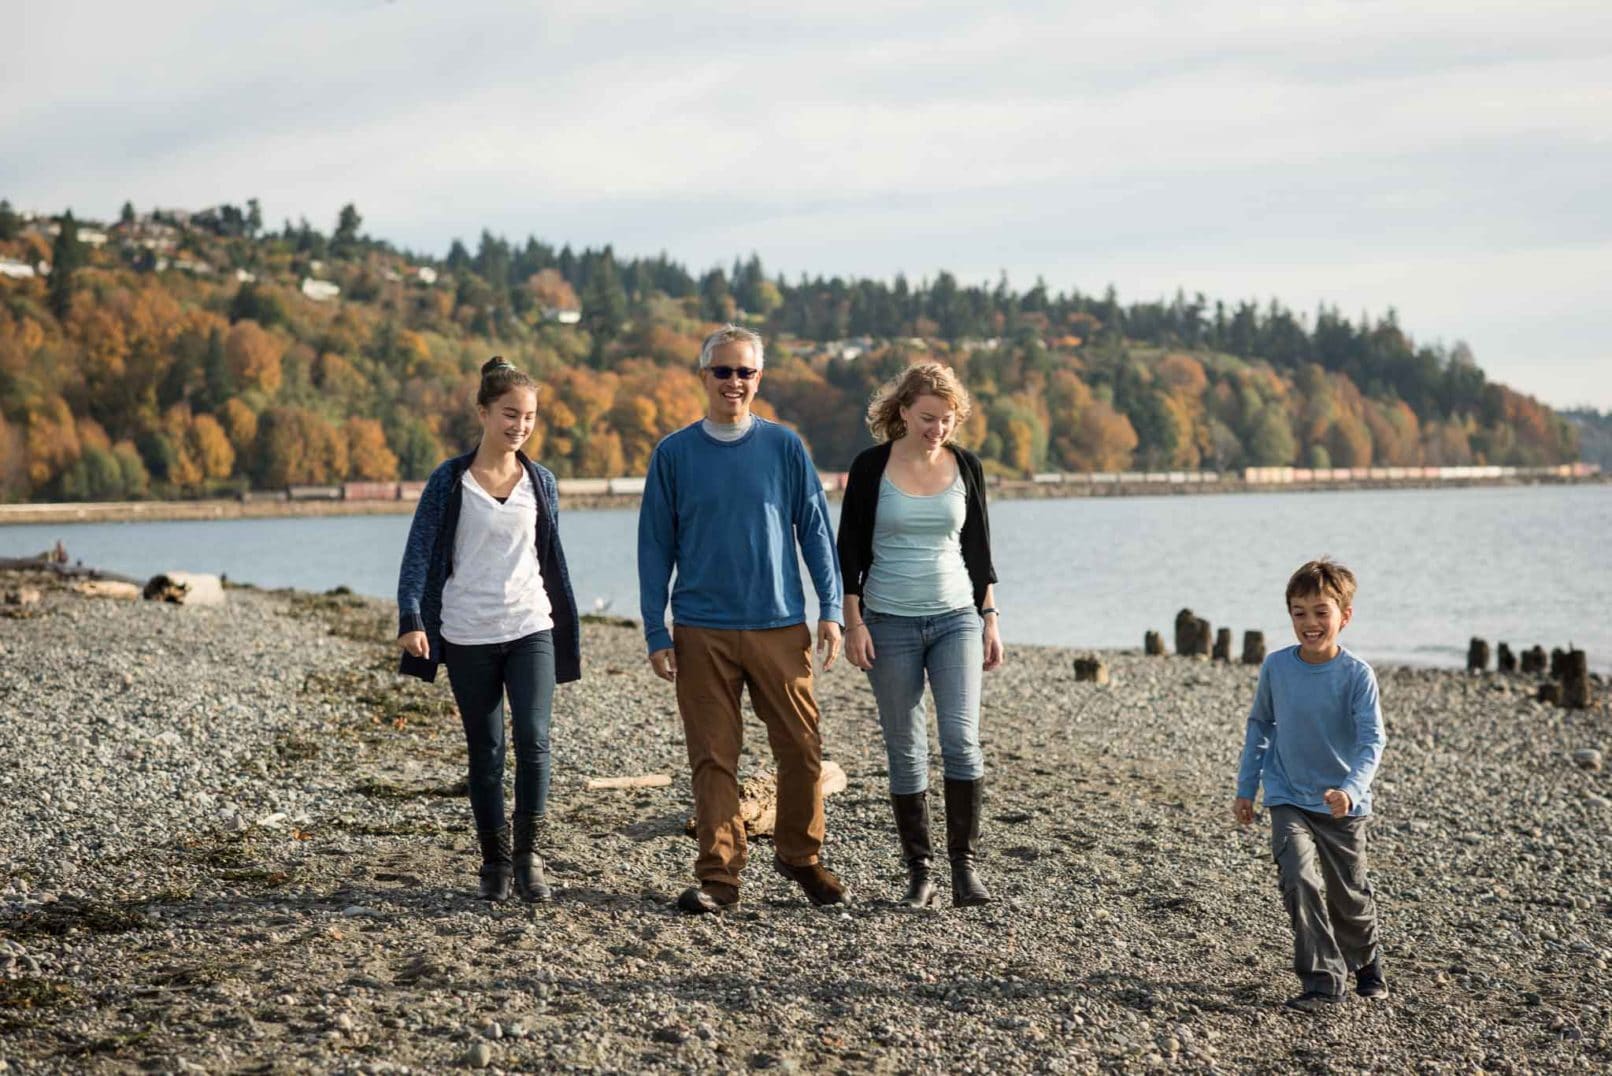 photo of a family walking on rocks alongside a water front with trees in background.